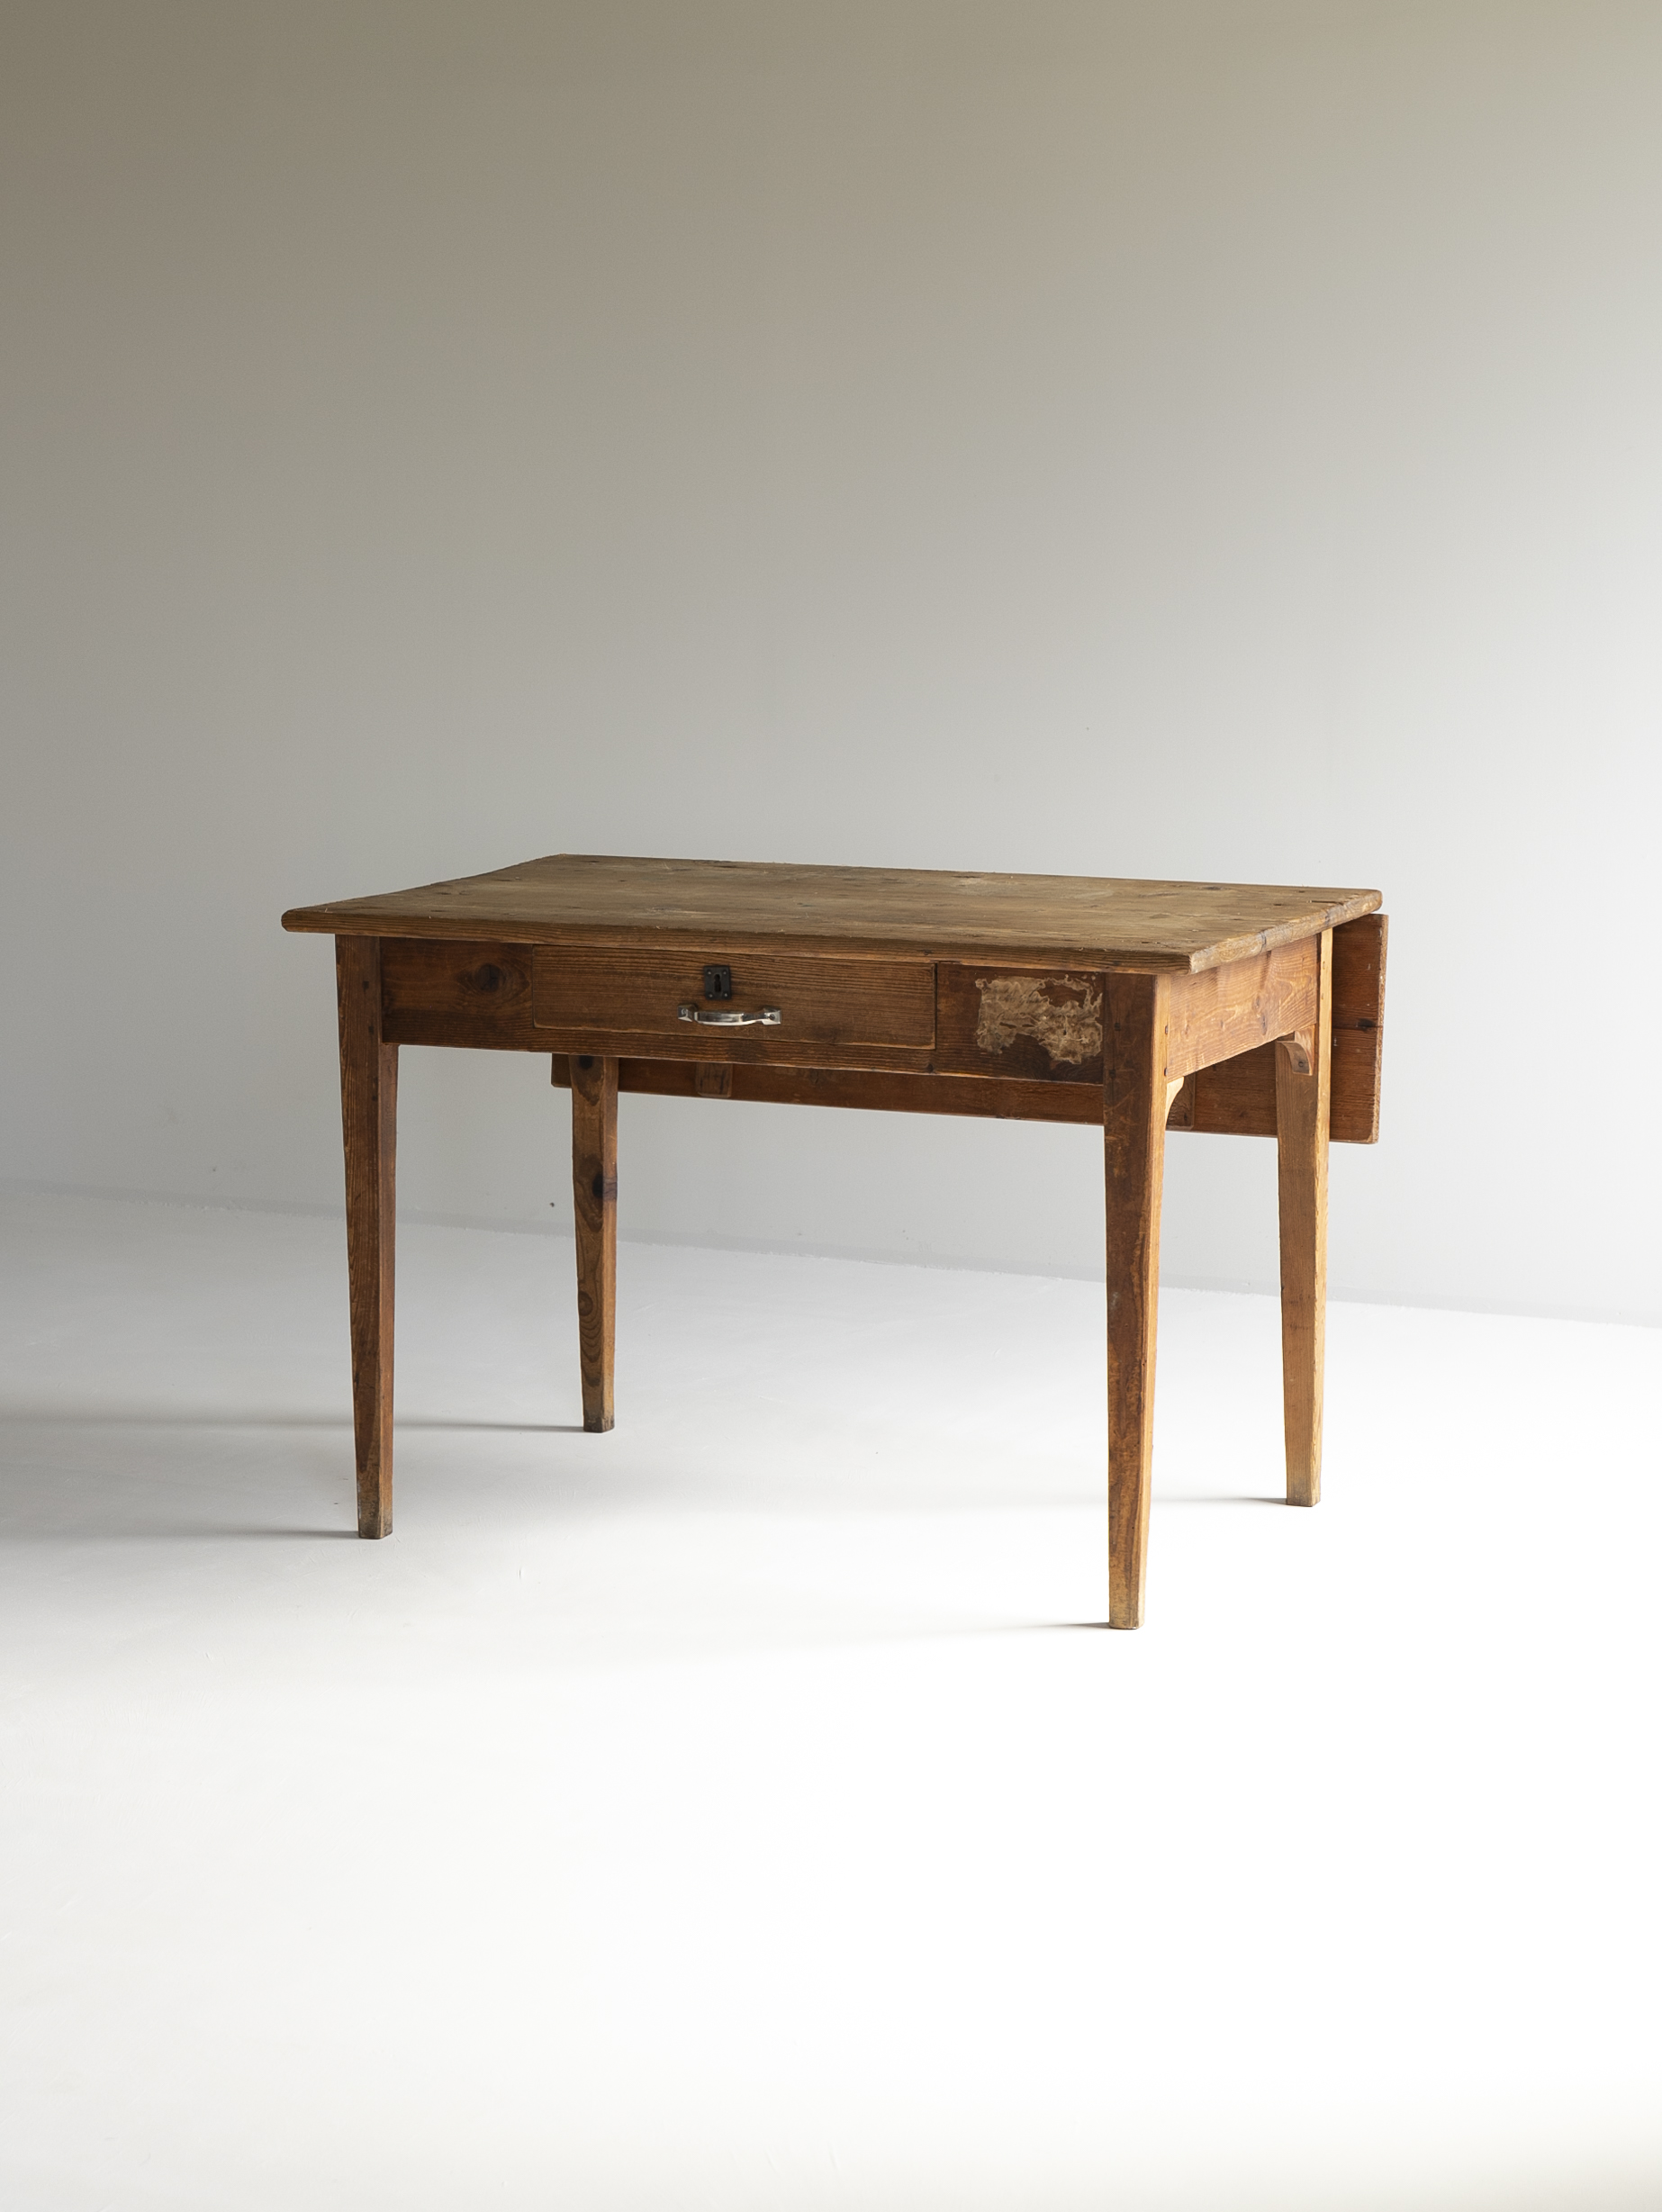 Antique Farm butterfly Table l アンティークバタフライテーブル